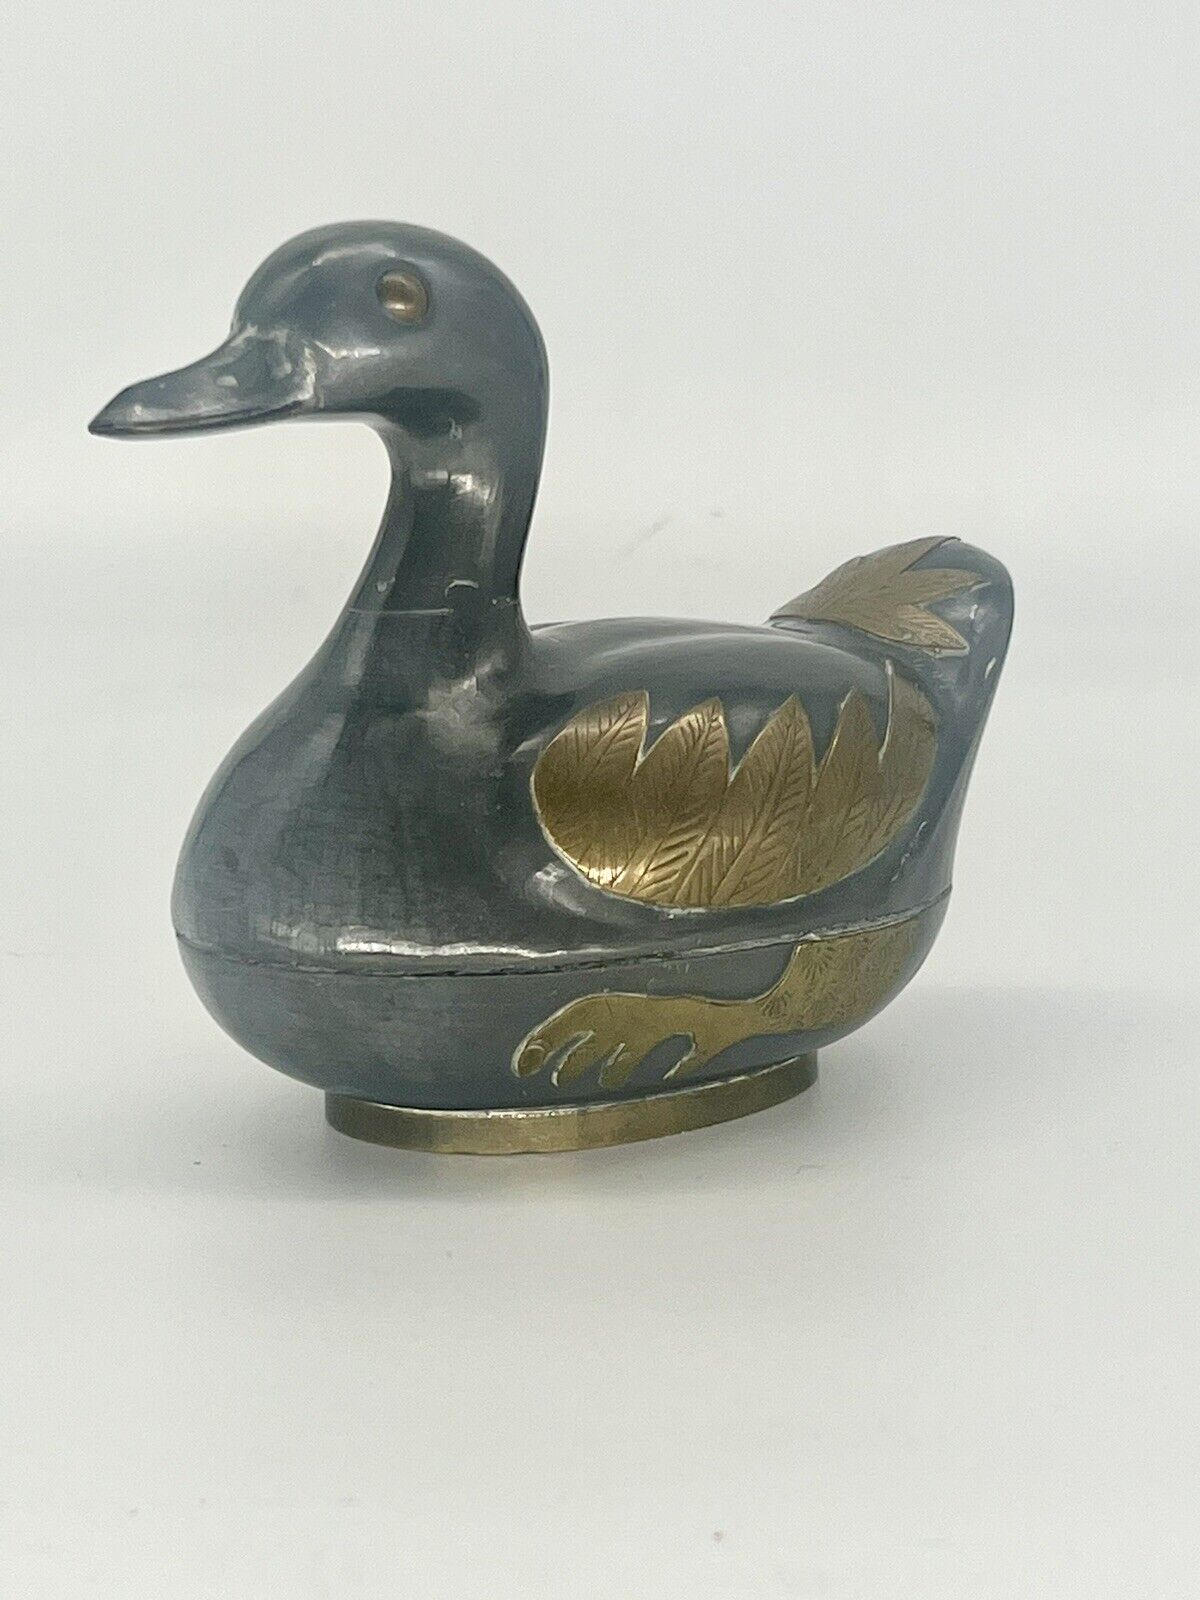 Vtg 1960s Duck Trinket Box Mid Century Pewter Brass Metal Hand Crafted Hong Kong